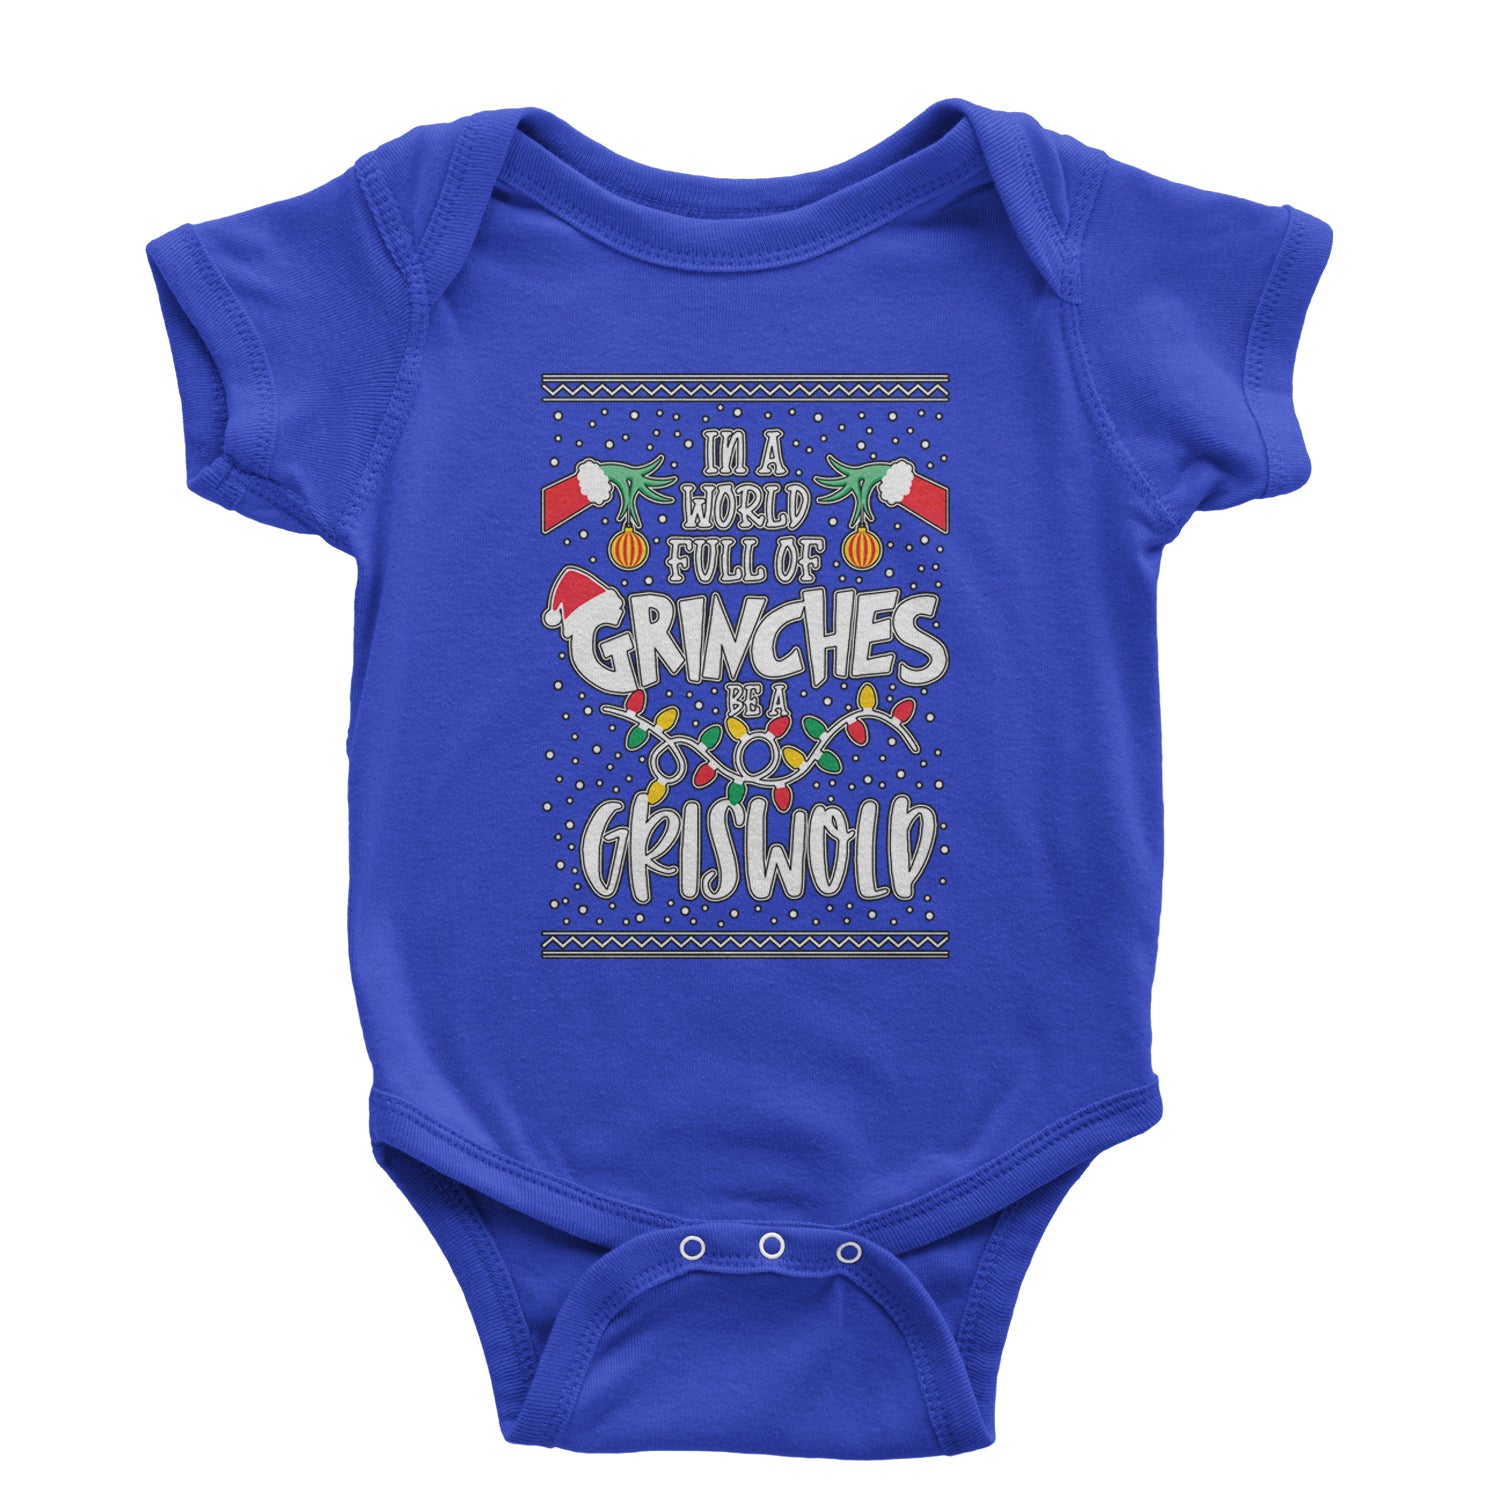 In A World Full Of Grinches, Be A Griswold Infant One-Piece Romper Bodysuit clark, griswold, lampoon, margot by Expression Tees